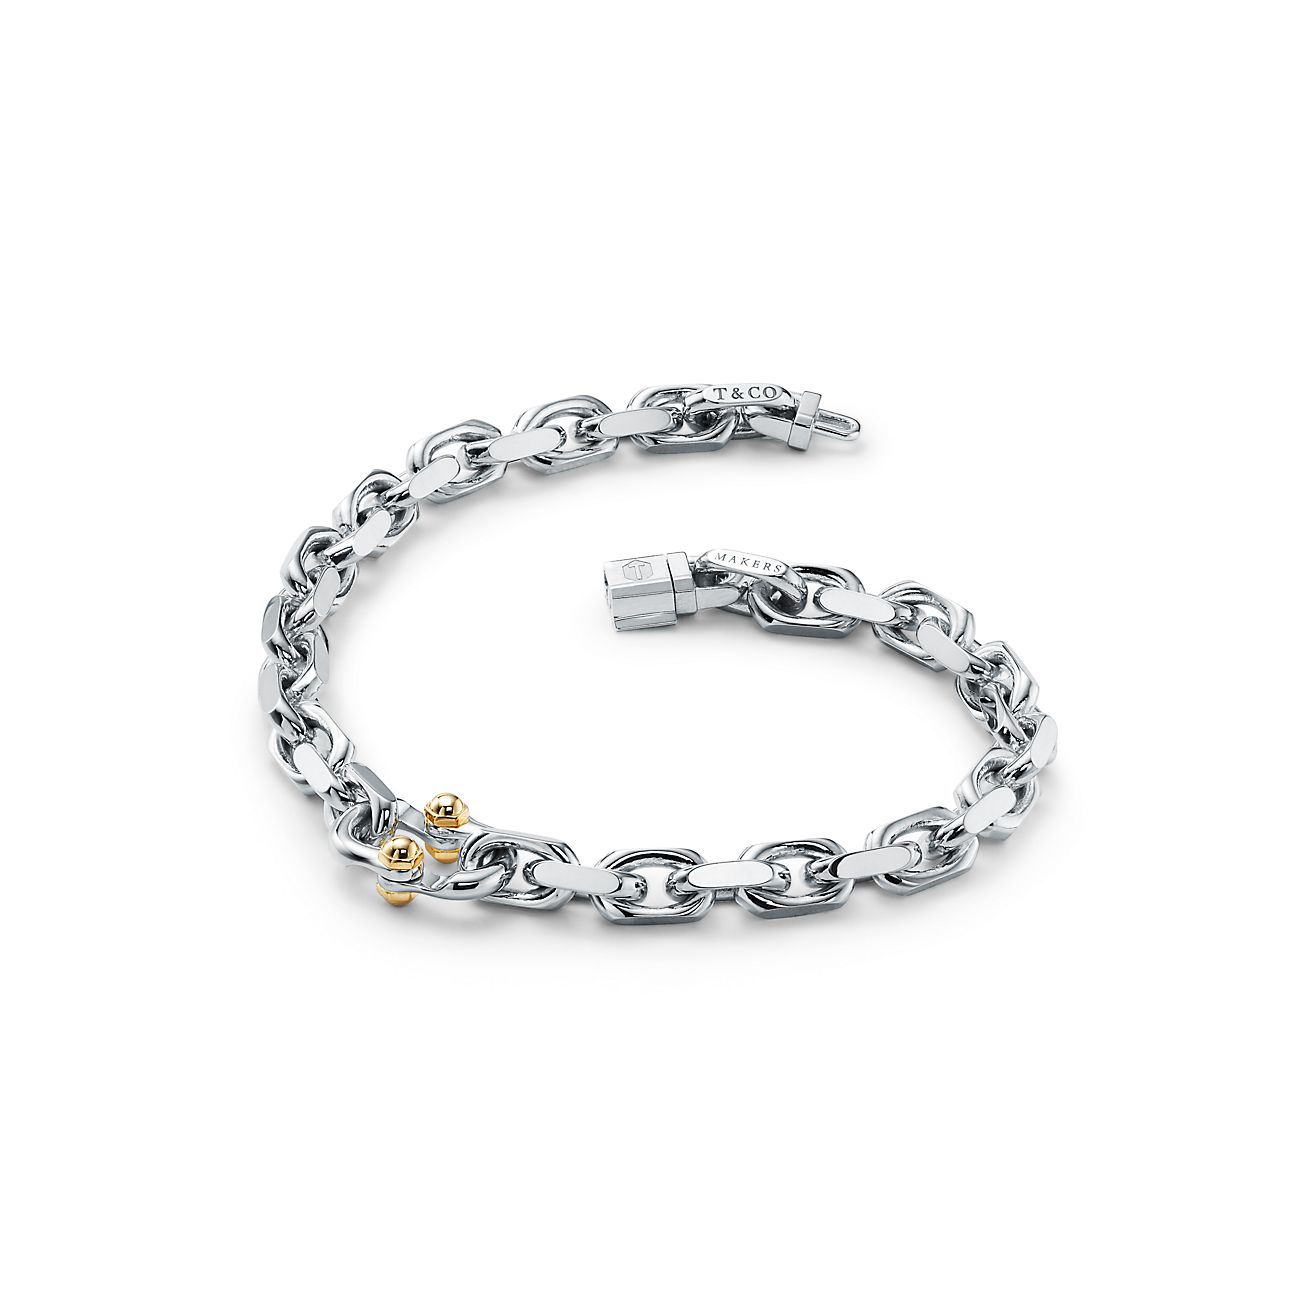 Tiffany 1837® Makers Narrow Chain Bracelet in Sterling Silver and 18k Gold